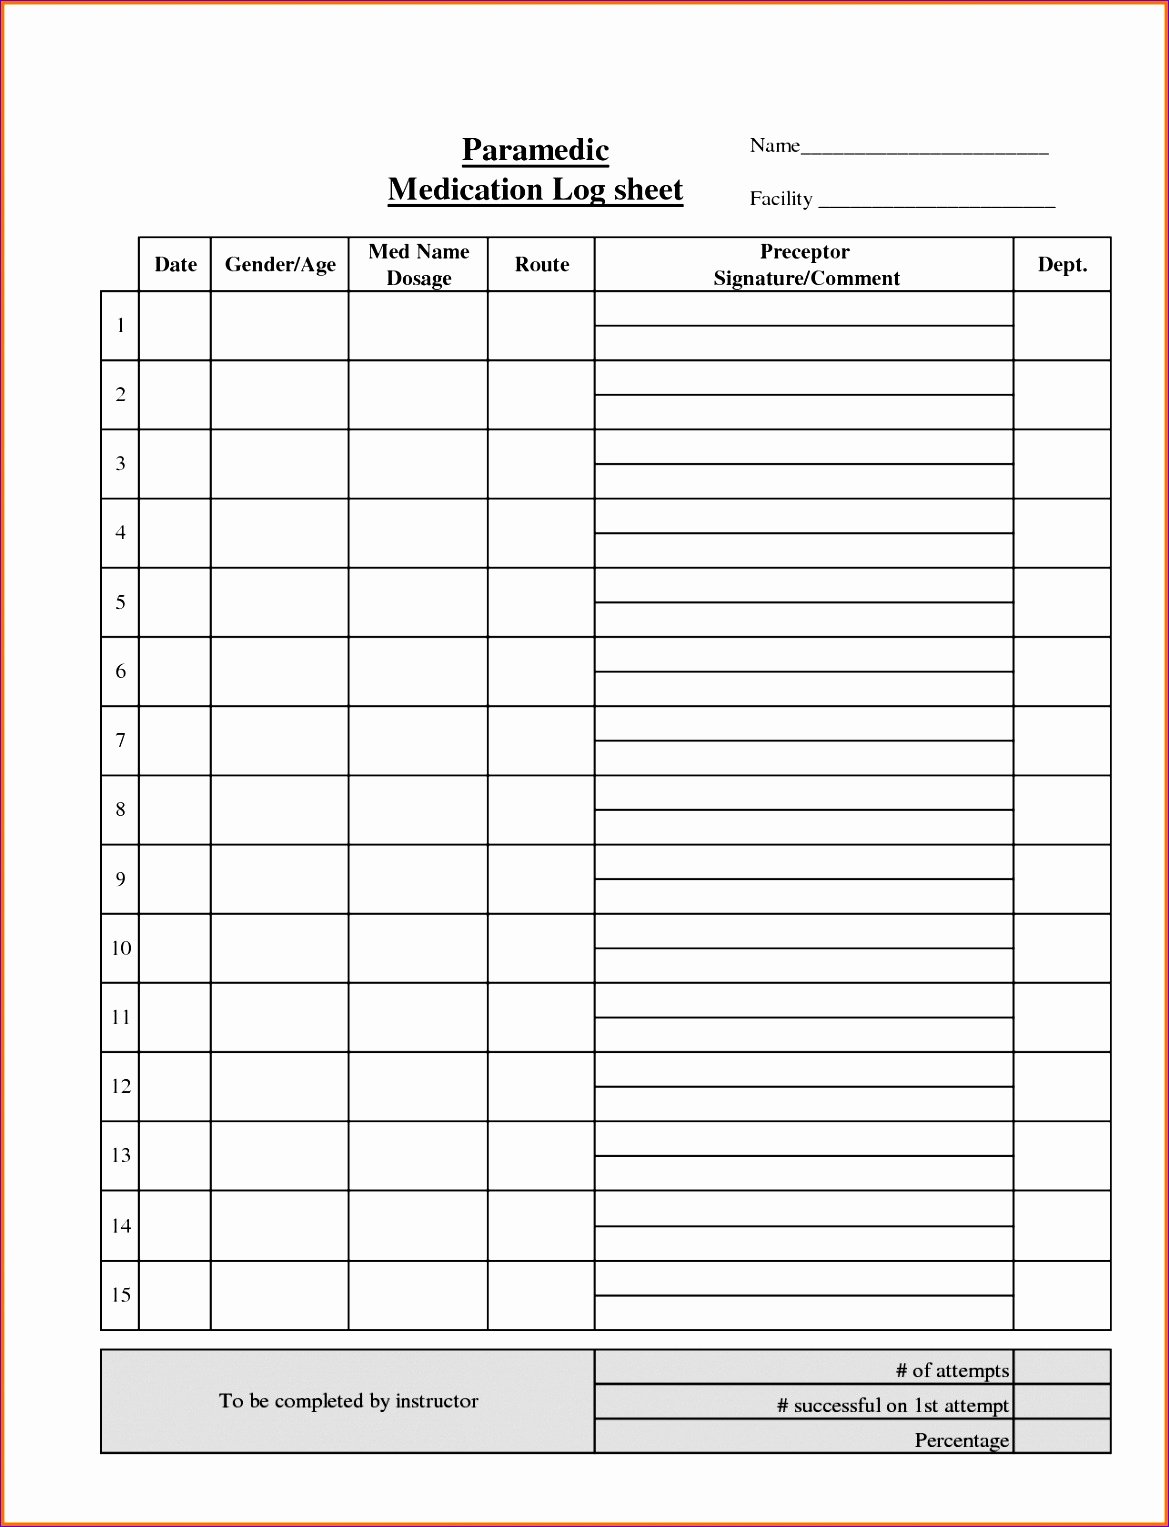 Punch List Template Excel Lovely 10 Punch List Template Excel Exceltemplates Exceltemplates